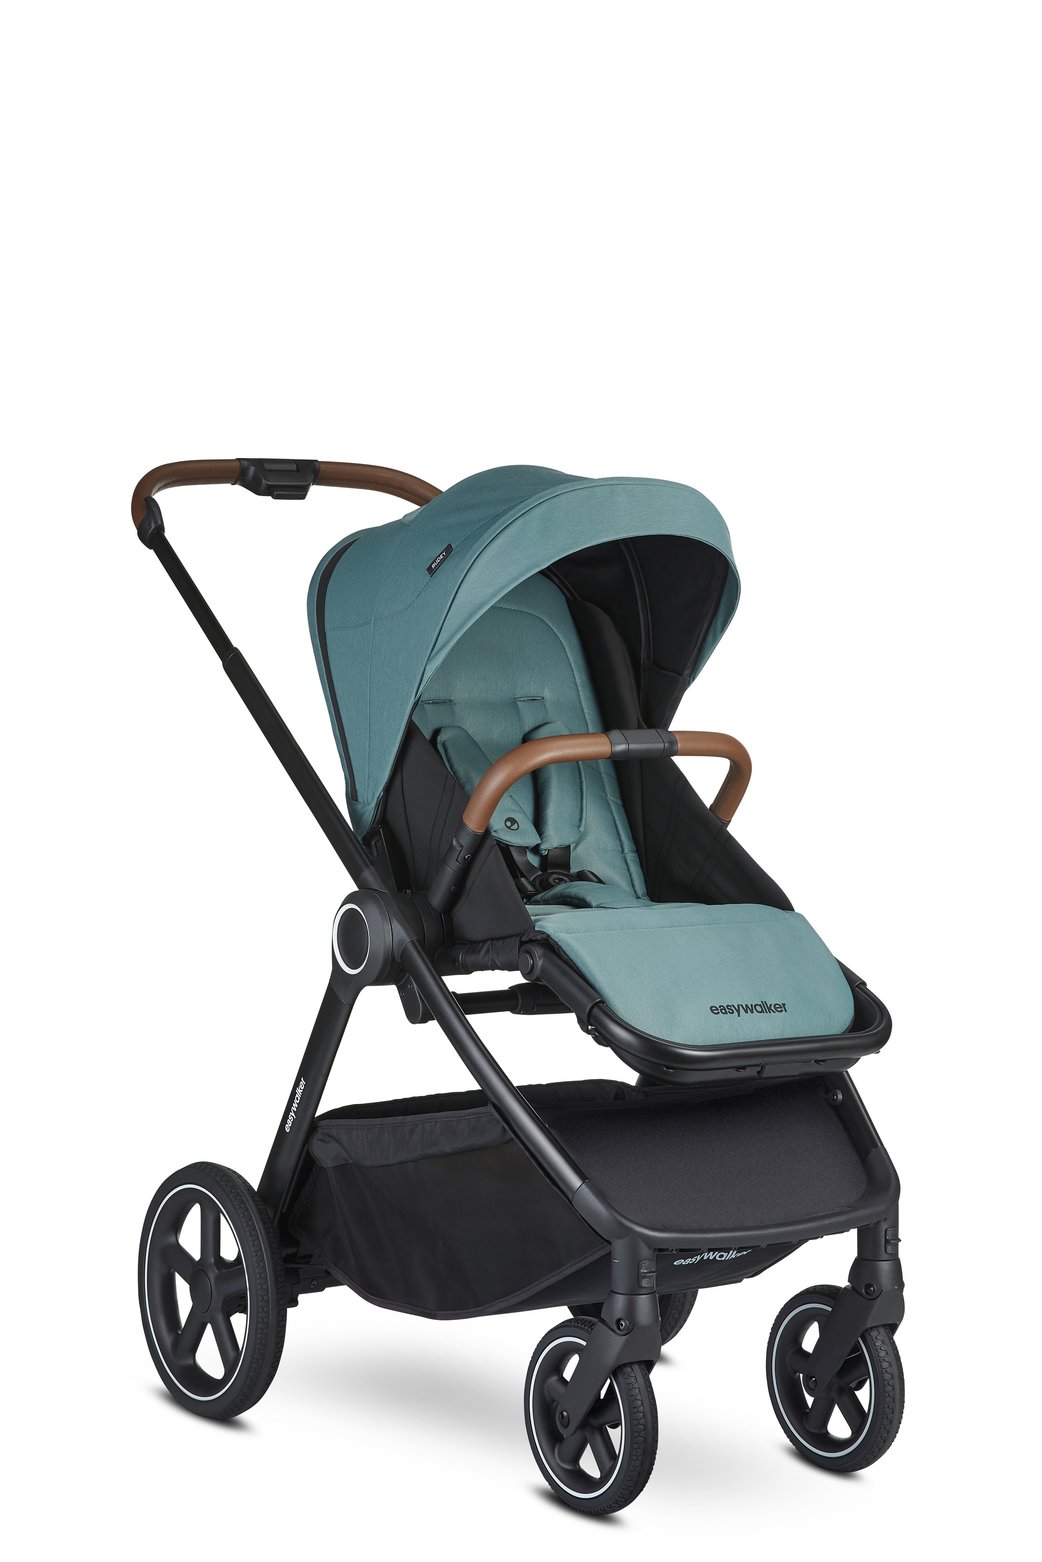 Easywalker Rudey questions, dimensions | pushchair experts @Strollberry